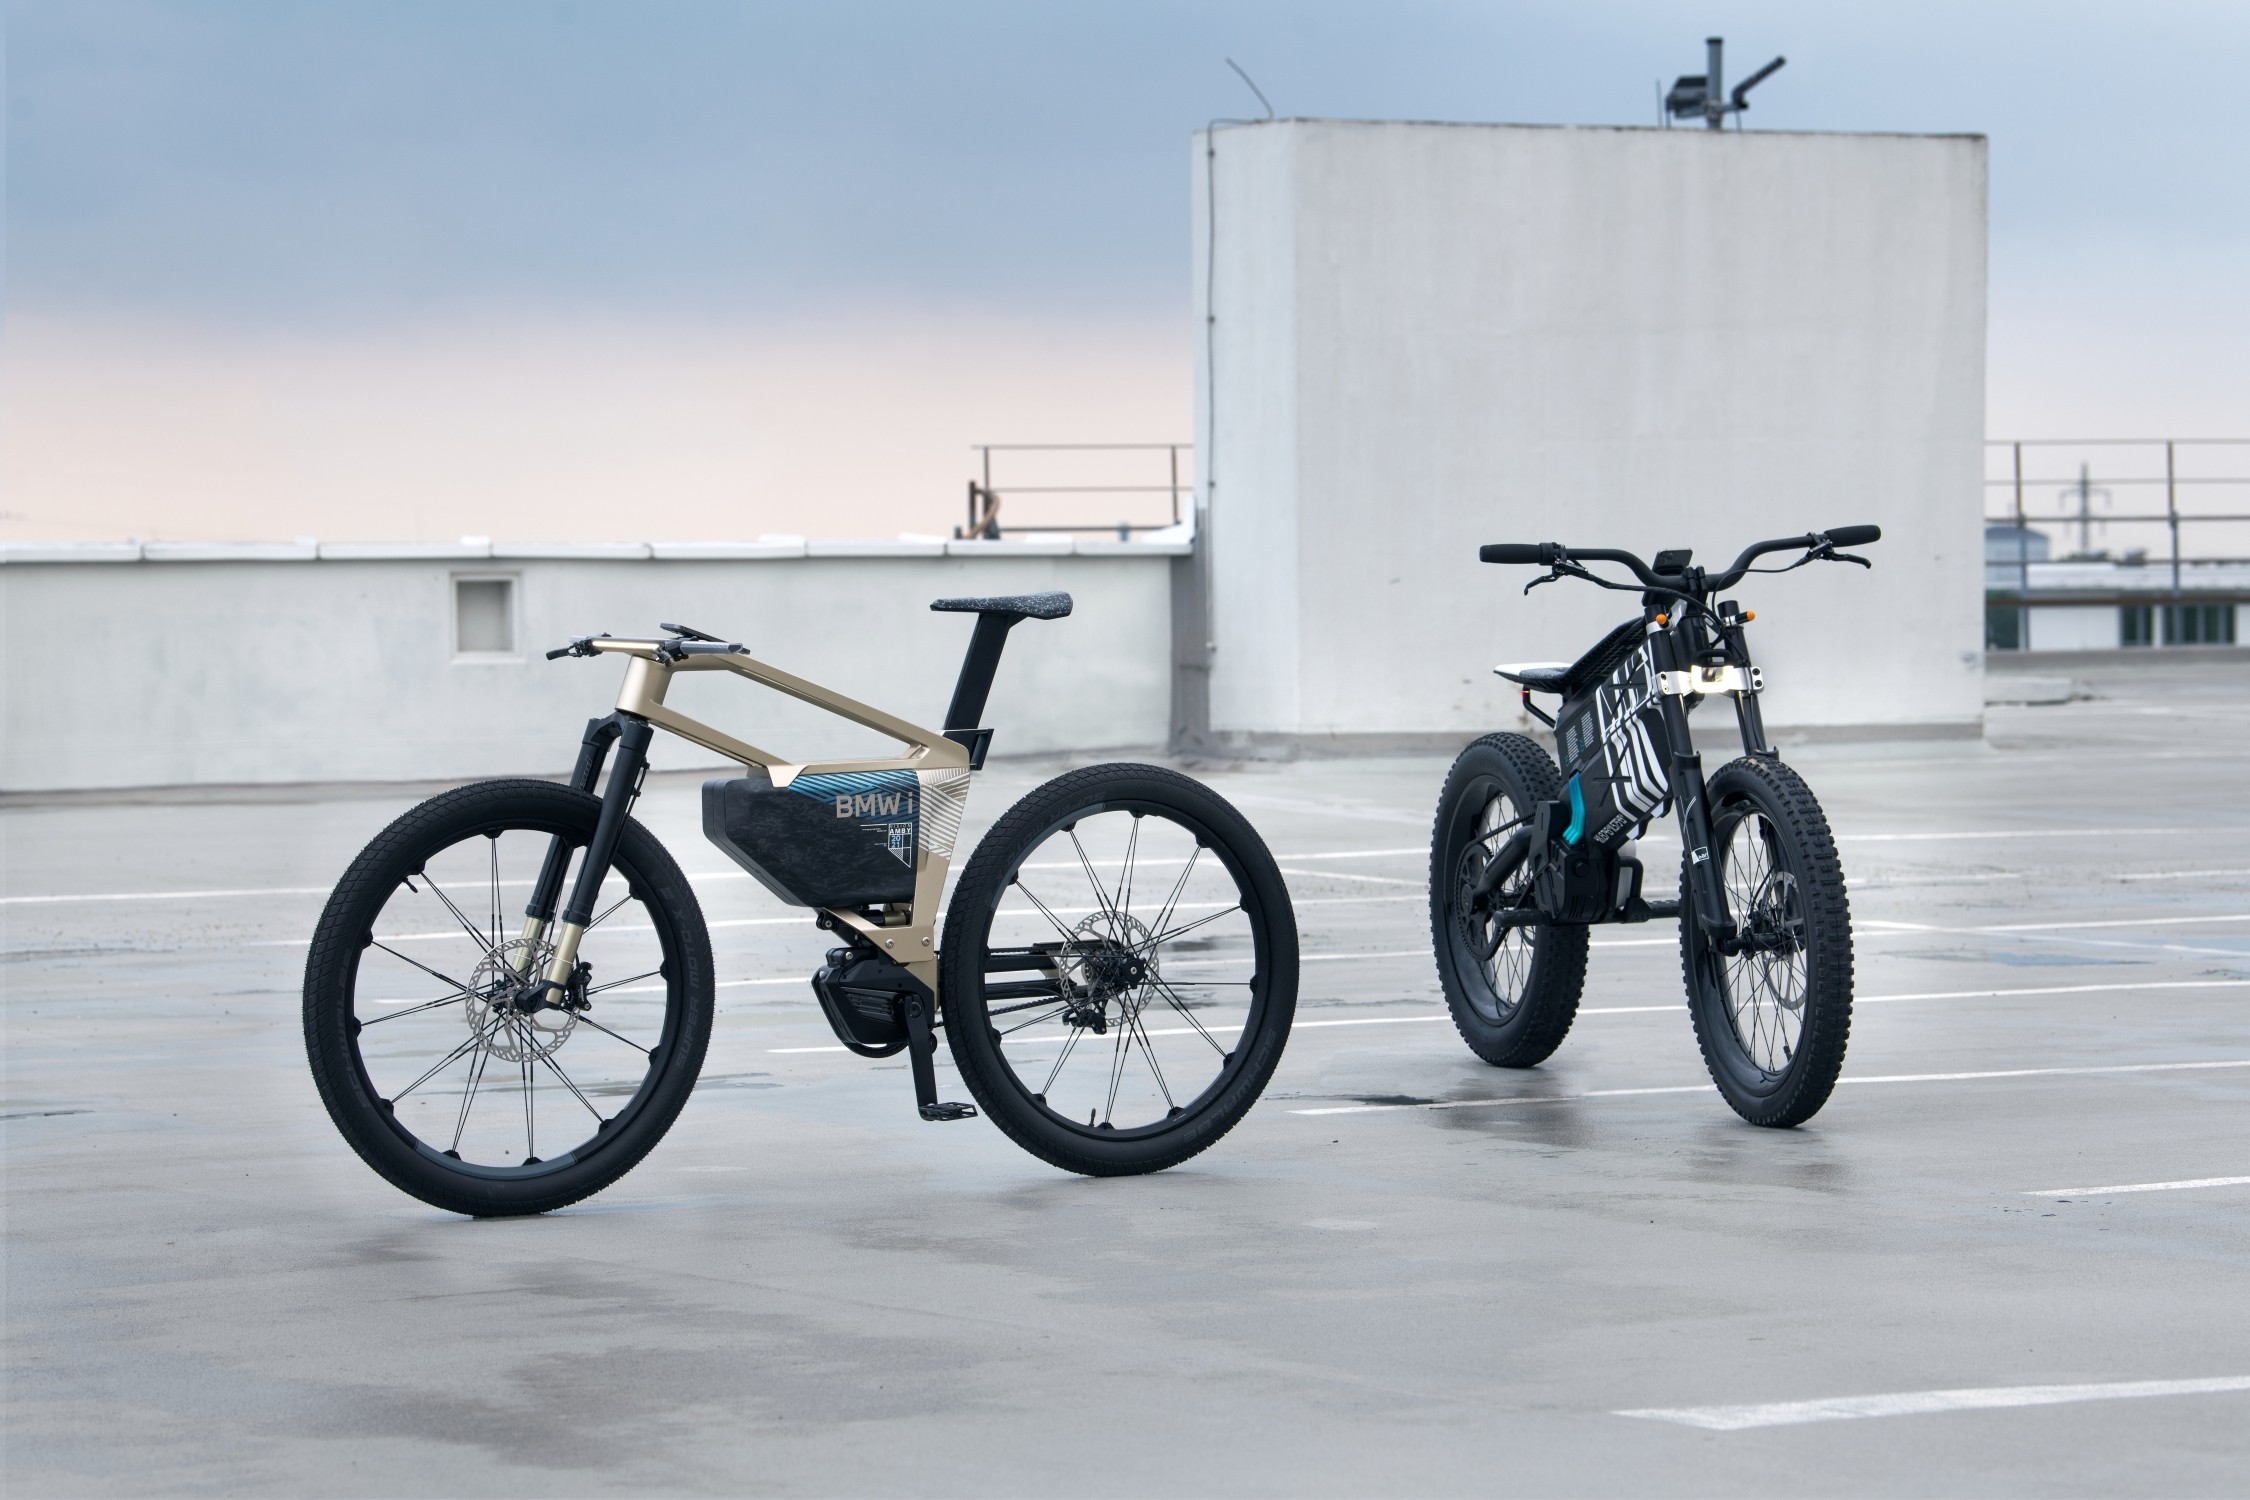 BMW introduces electric bikes with a range of up to 300 km